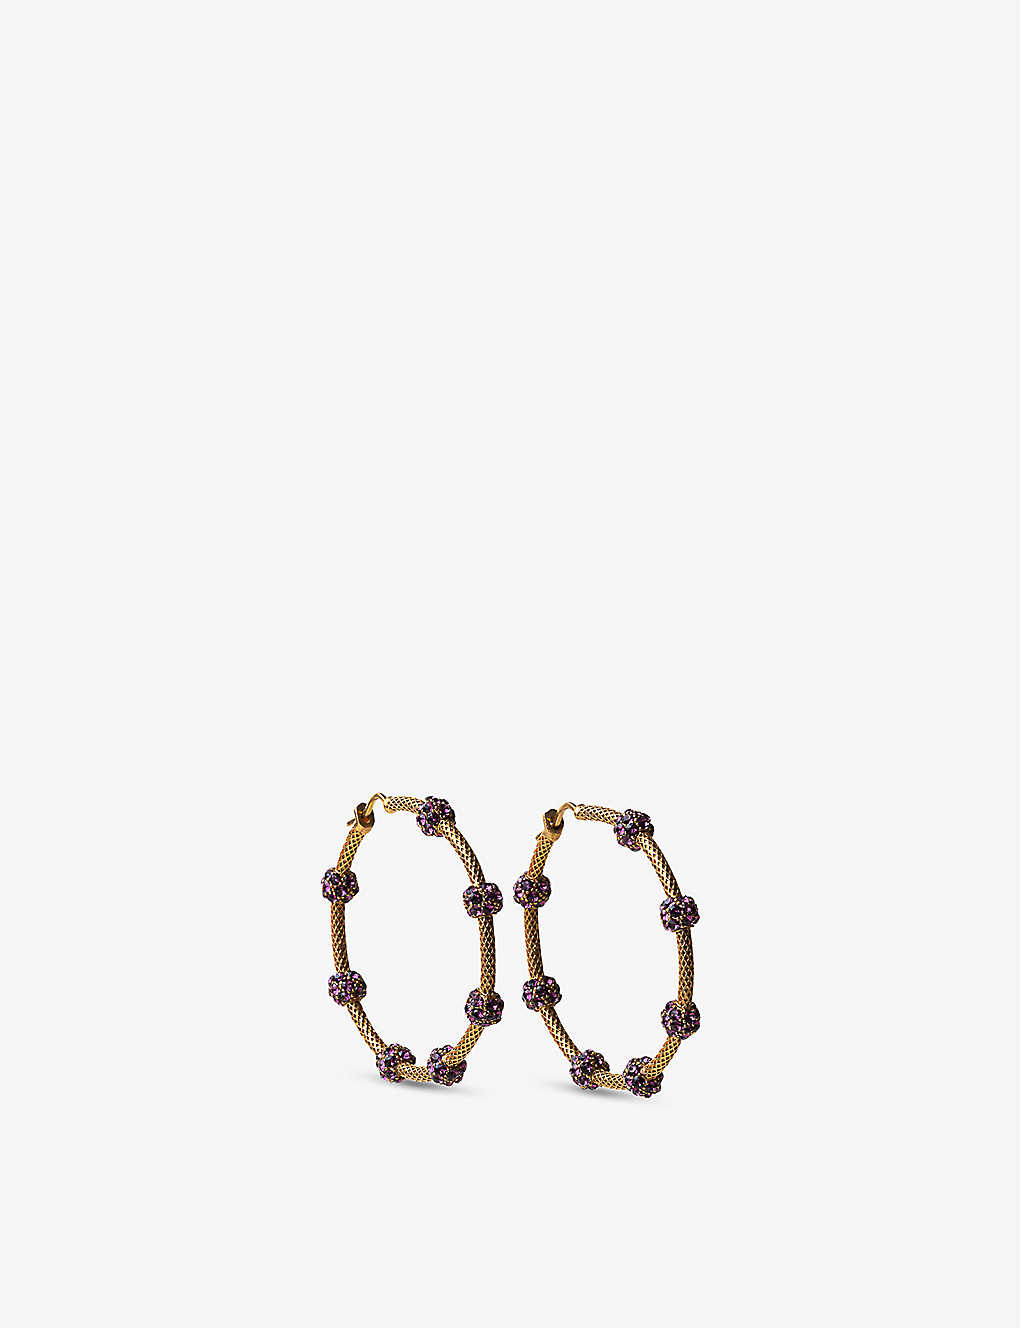 La Maison Couture Women's Amethyst Sonia Petroff 24ct Yellow Gold-plated Brass, Amethyst, And Swarov